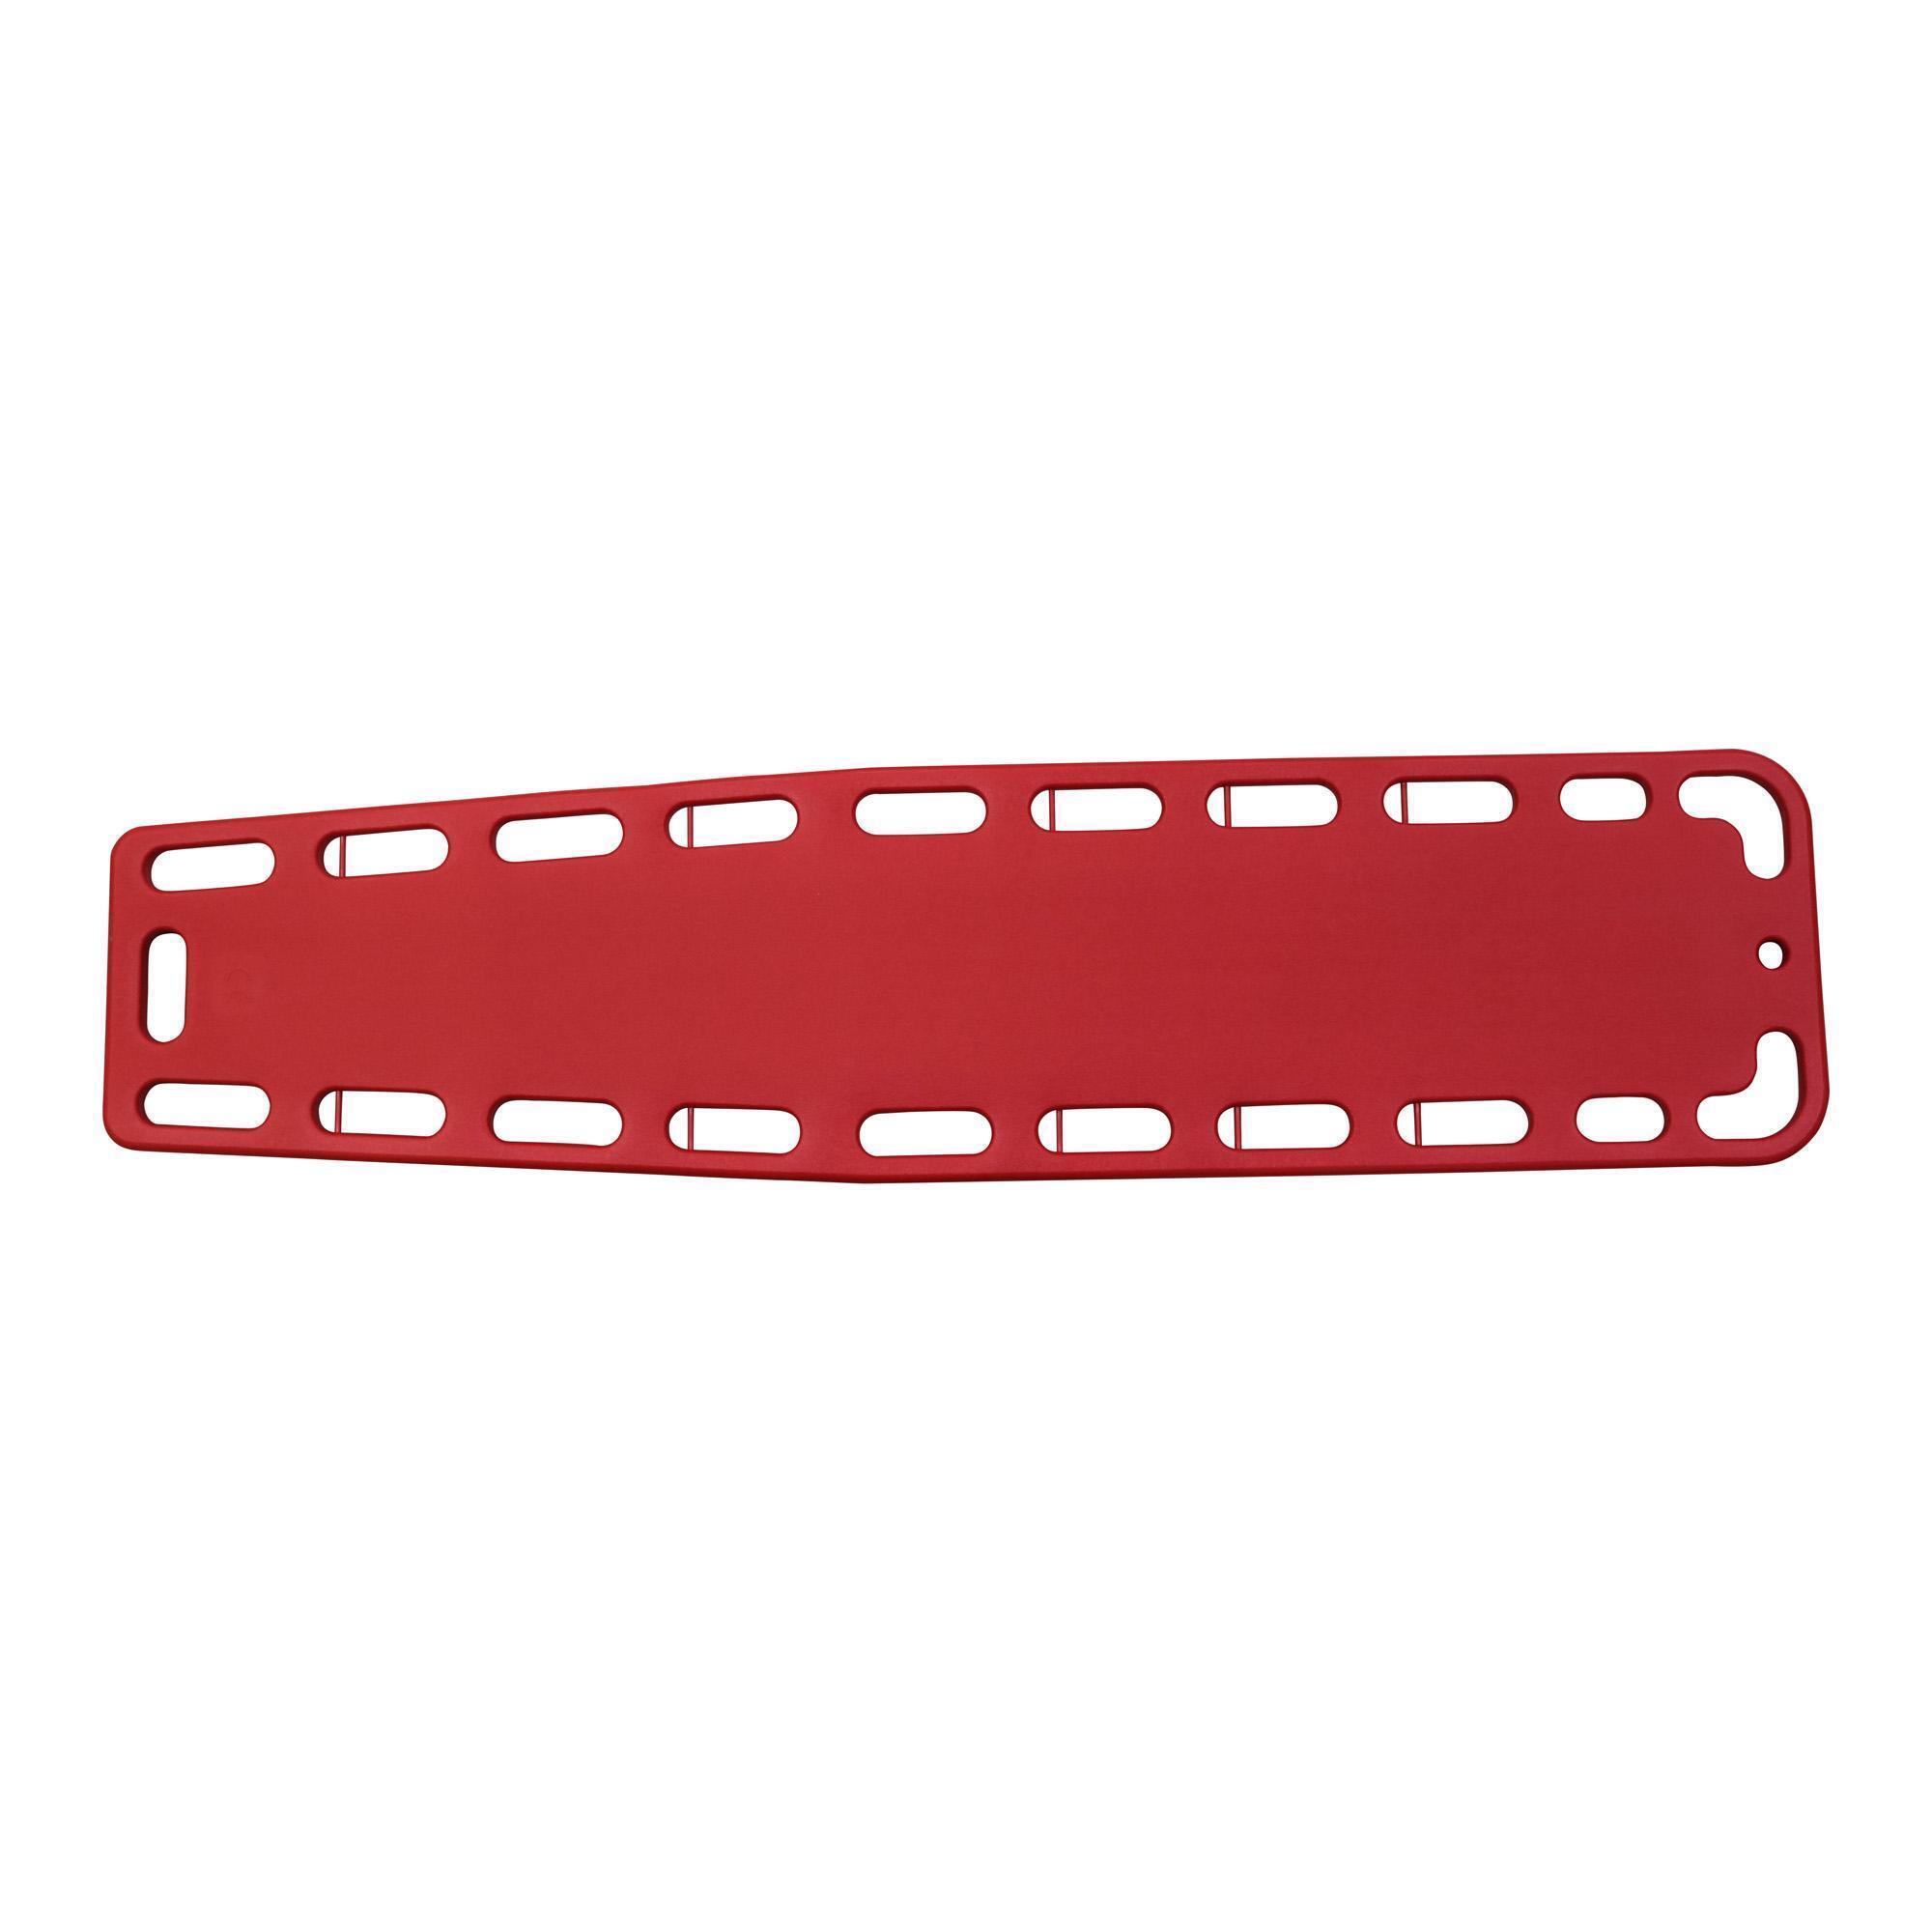 6' Solid Red Rescue and Emergency Accessories Kemp USA Adult 18-Inch Spineboard